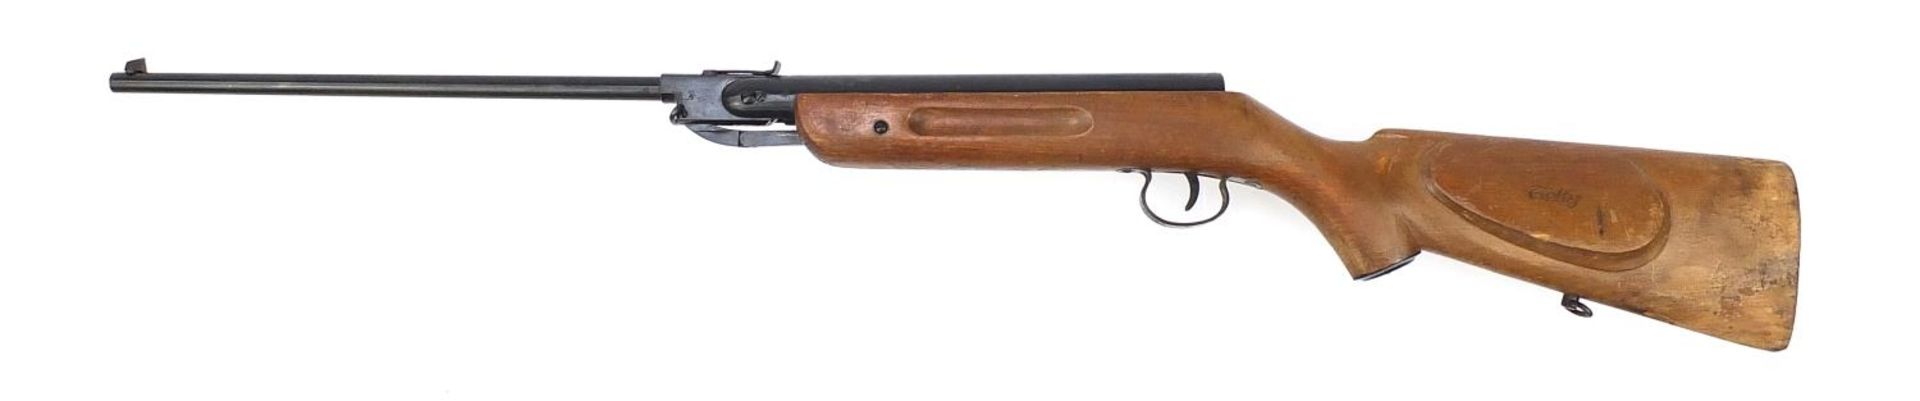 Vintage break barrel air rifle, 98cm in length :For Further Condition Reports Please Visit Our